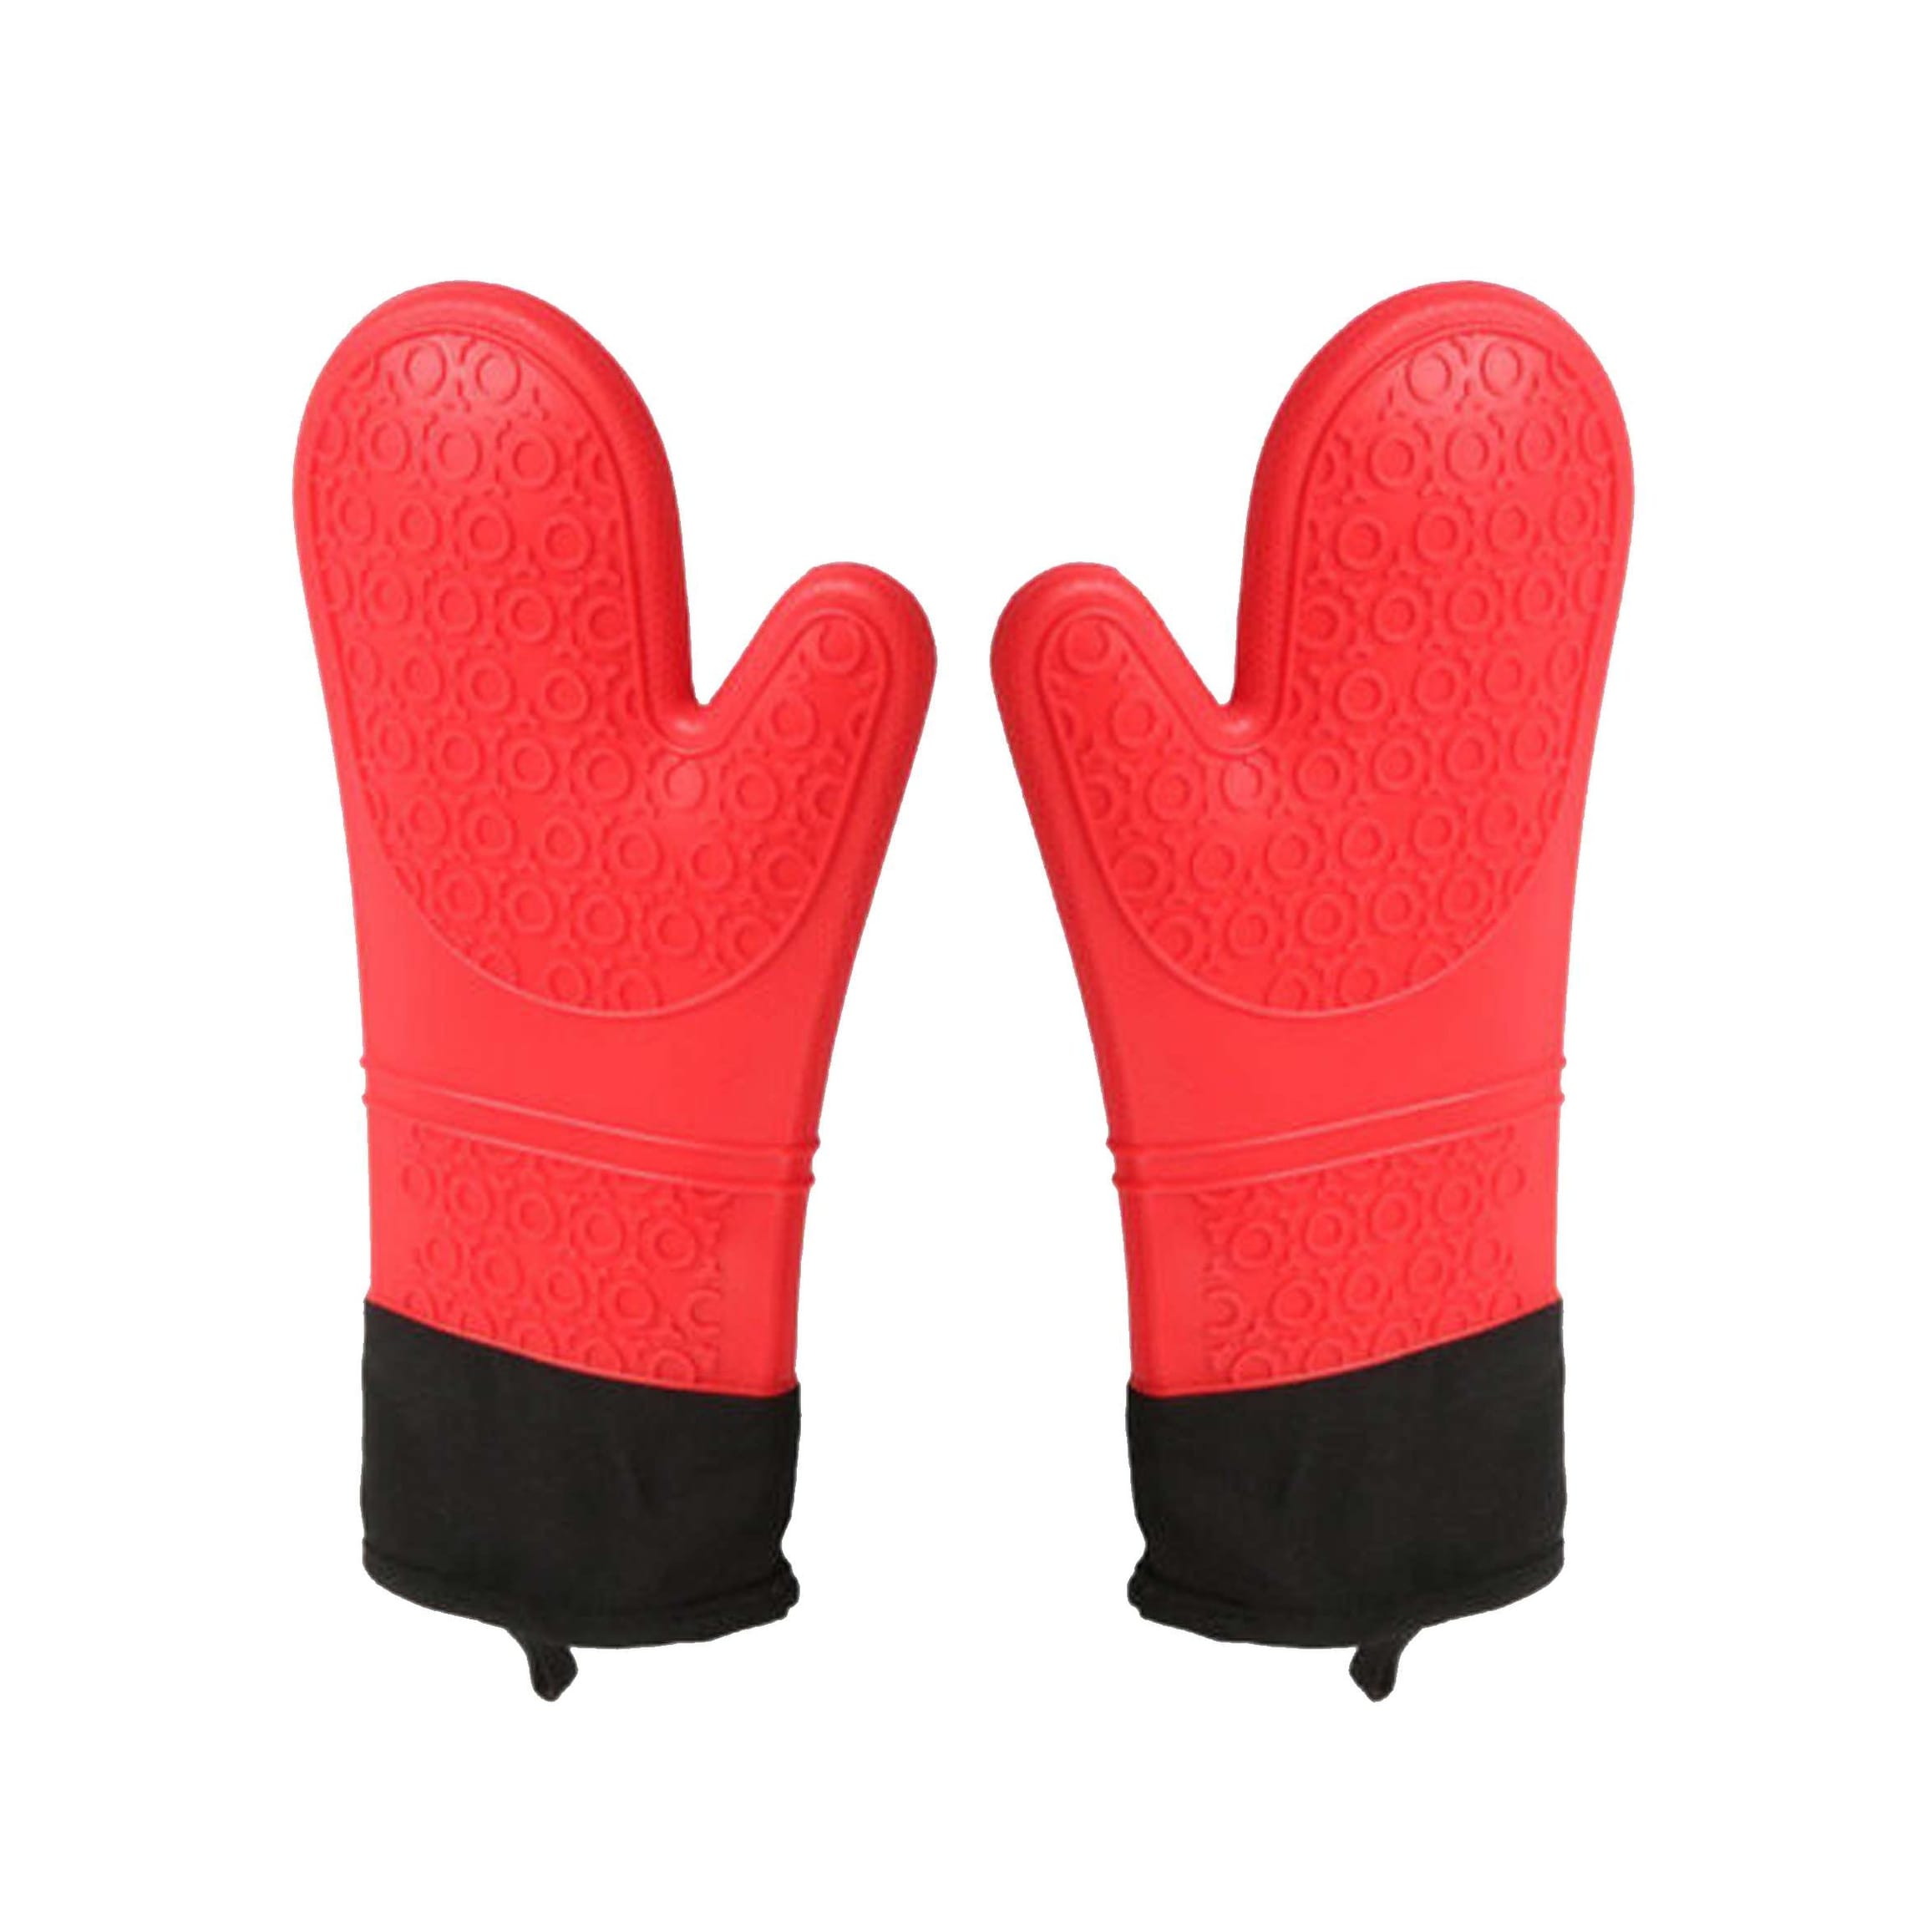 https://ak1.ostkcdn.com/images/products/is/images/direct/c148e19ab503e44547607db0e2d655c56aa97f43/STYLISH-Heat-Resistant-Silicone-Mitts.jpg